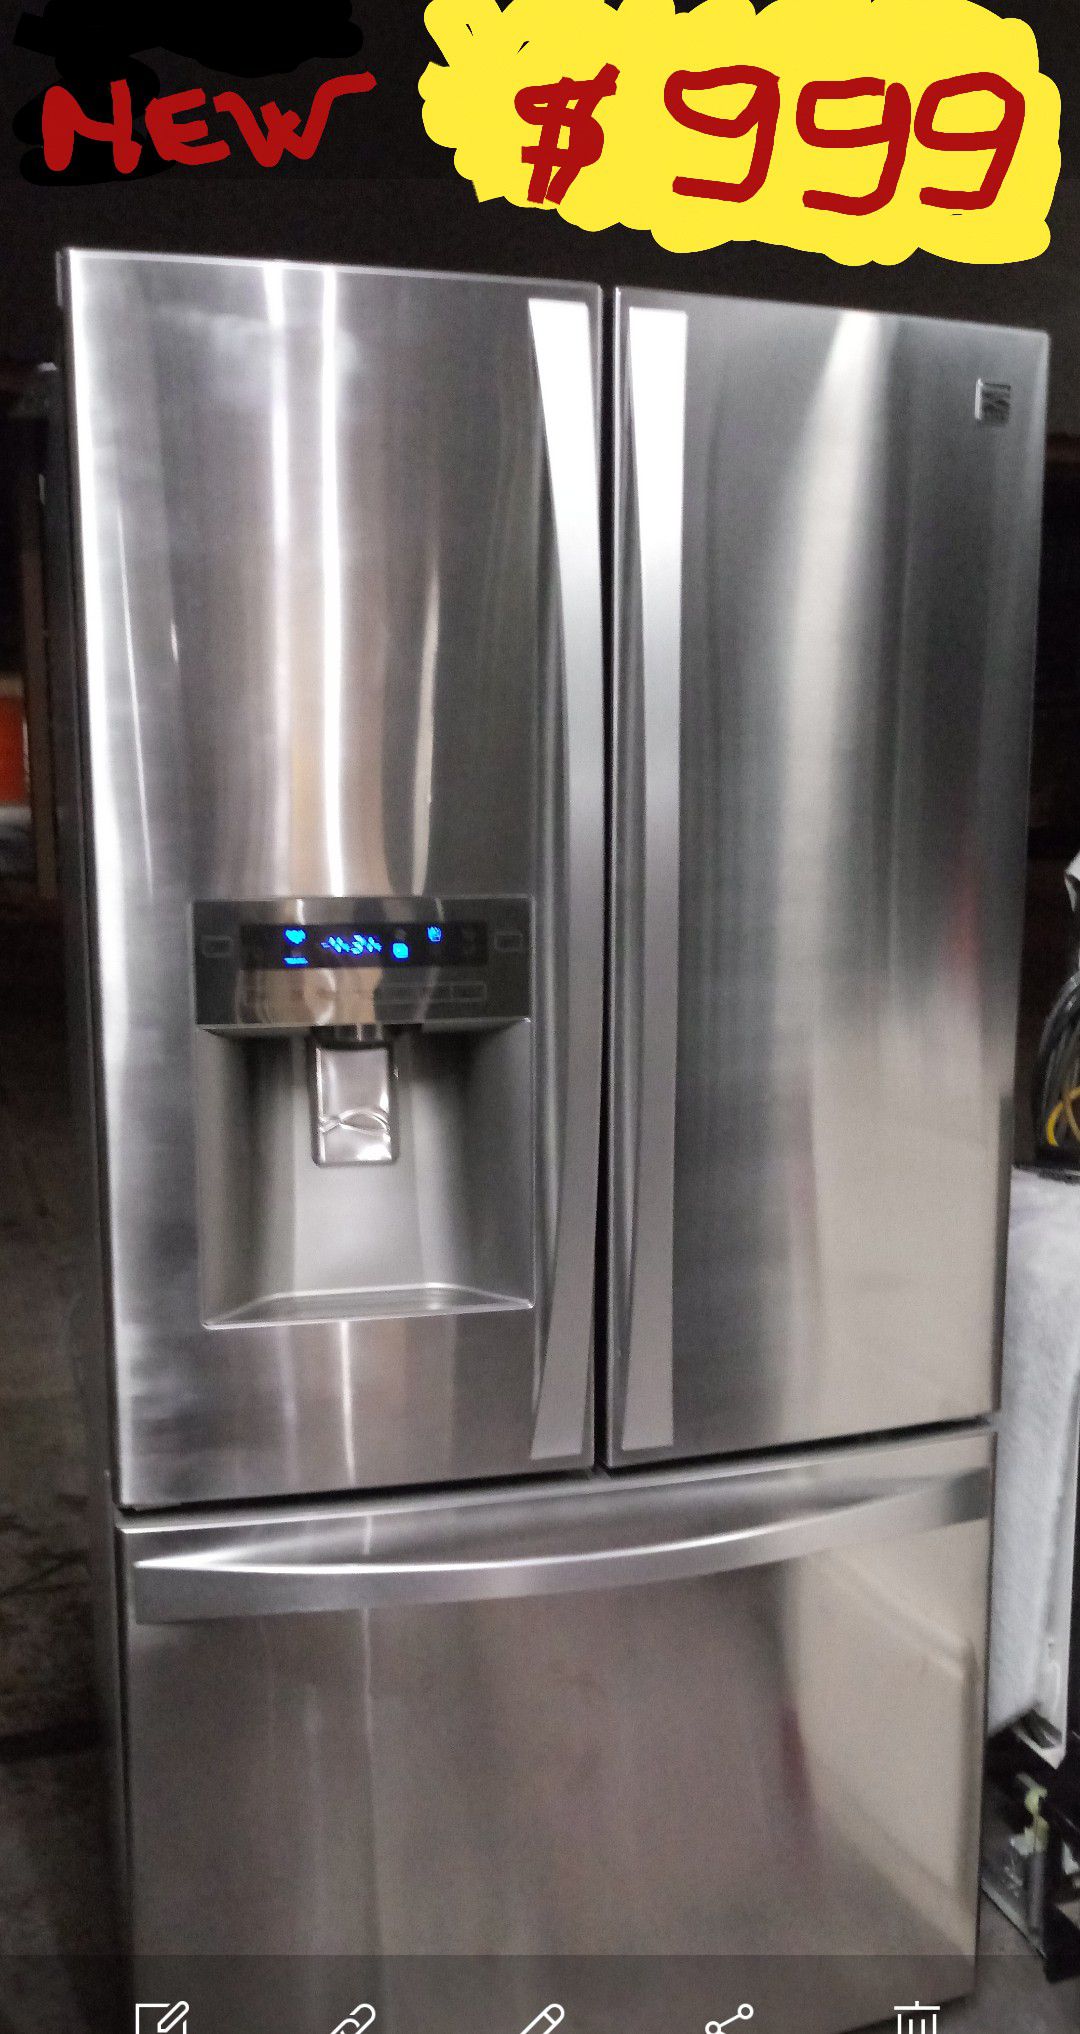 New 33 CF Kenmore elite refrigerator fridge French door stainless steel with ice and water dispenser